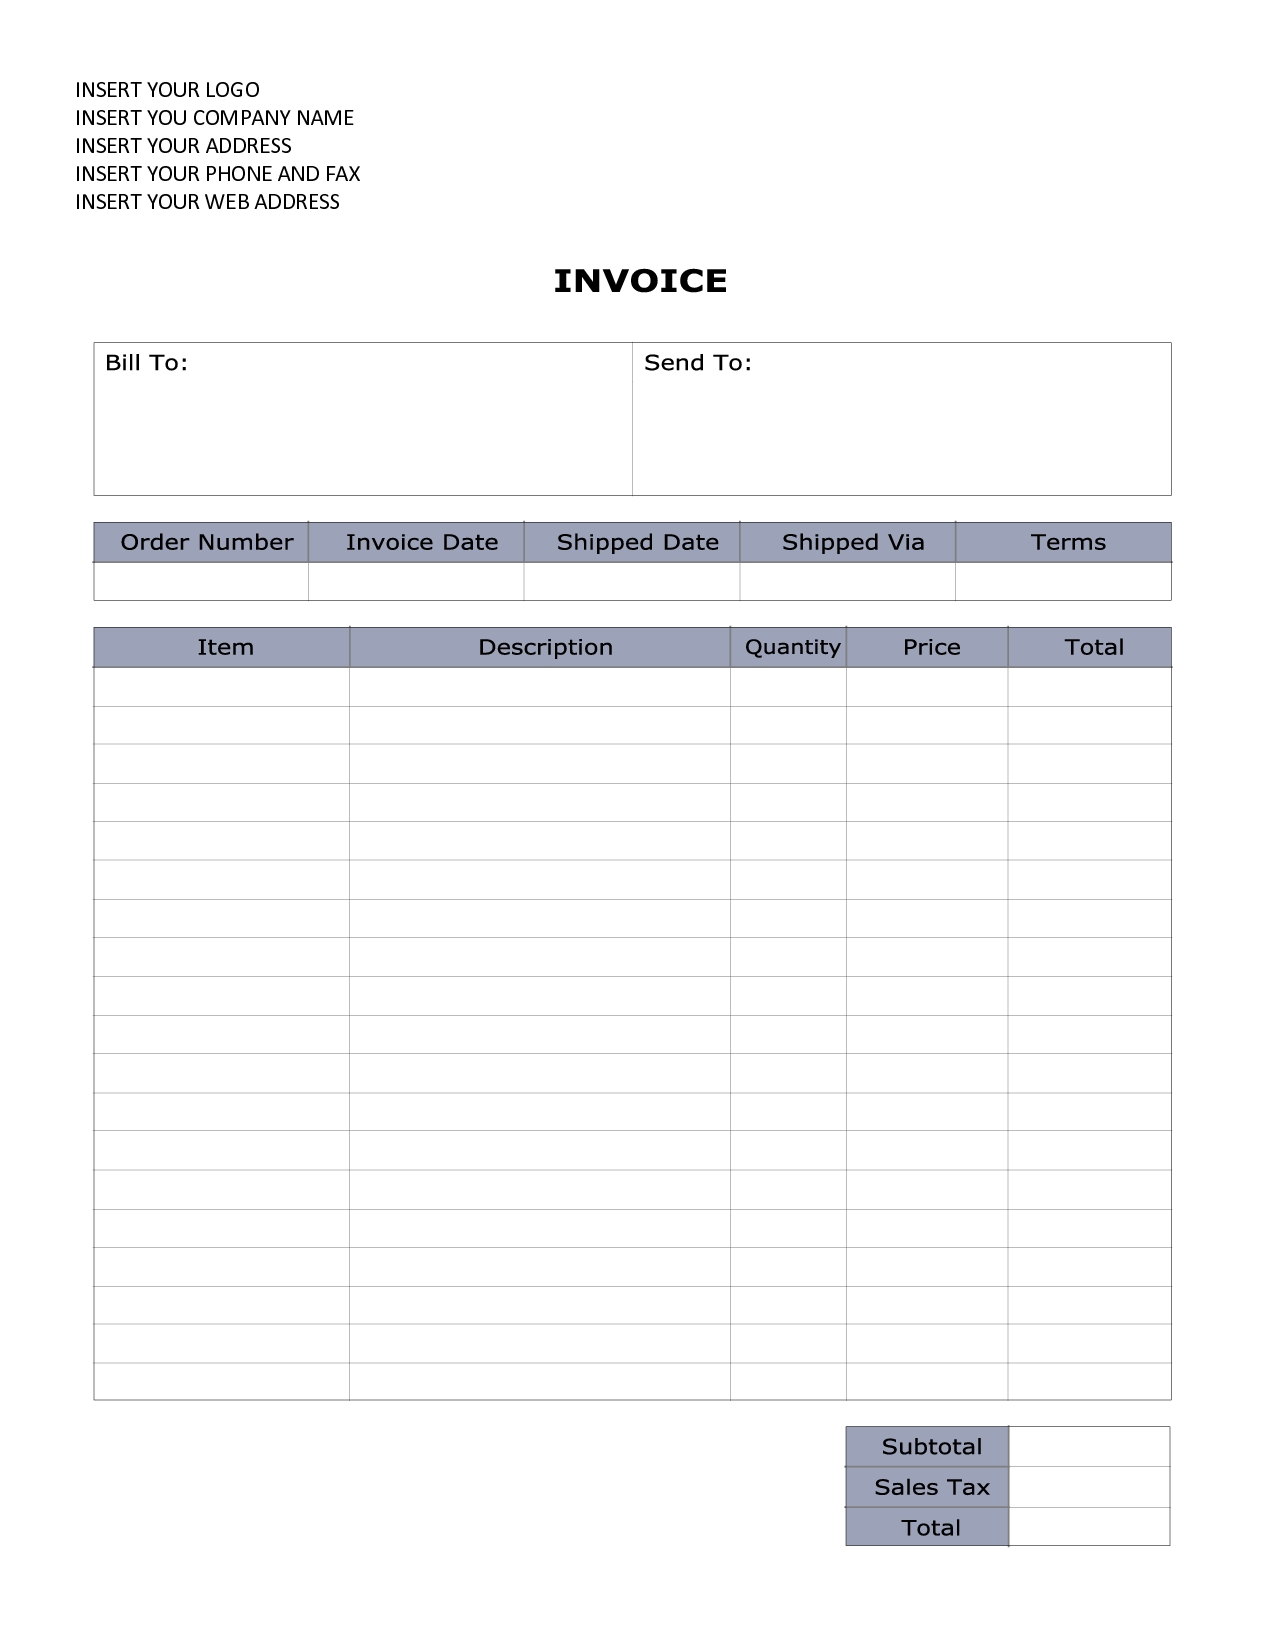 microsoft word invoice template 2010 all about template word templates for invoices